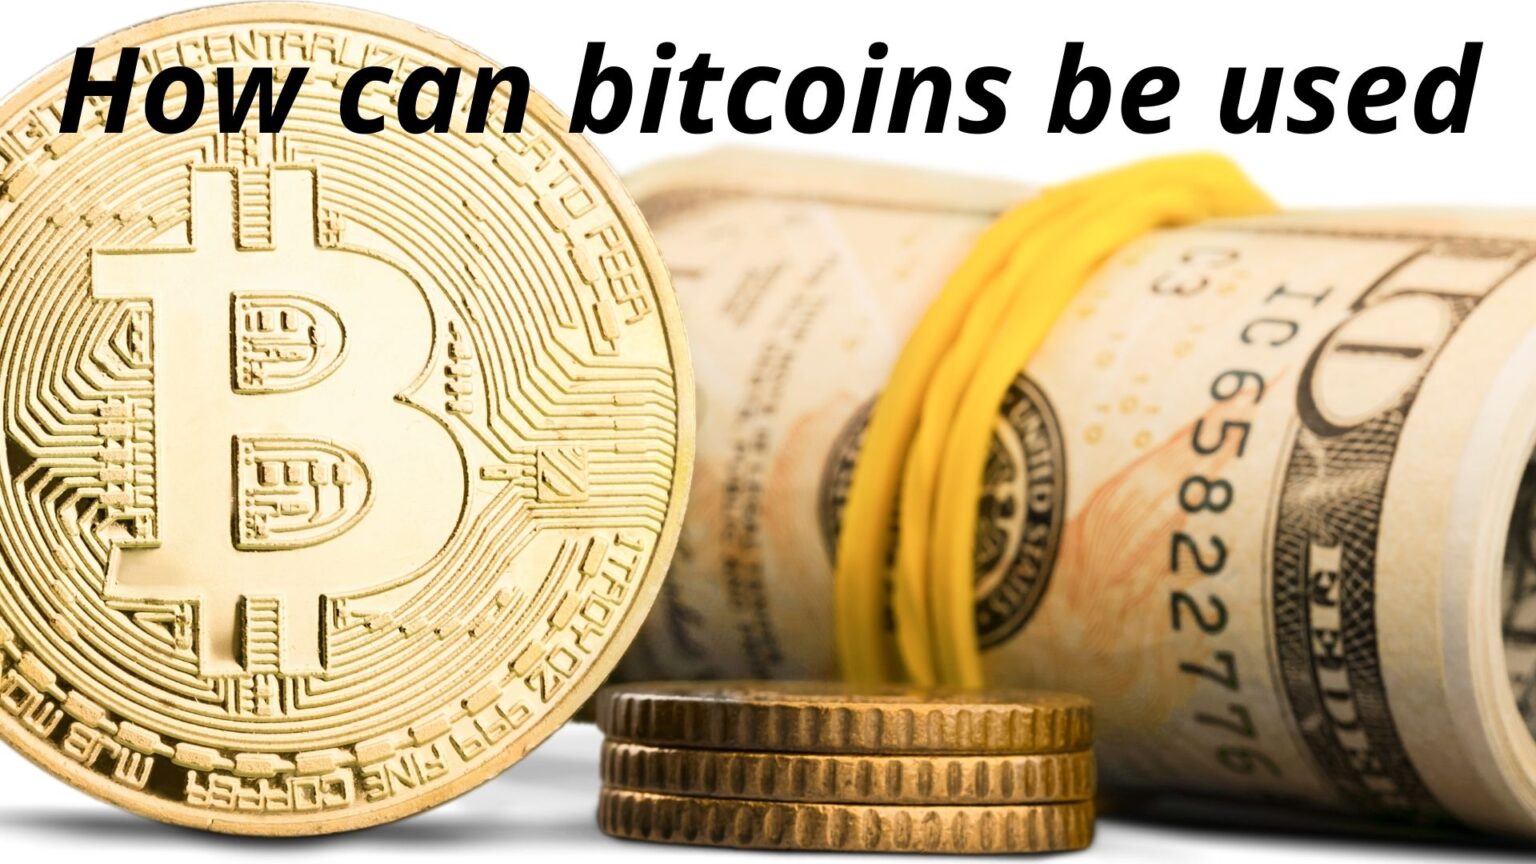 if bitcoins a limited how can eveyone buy